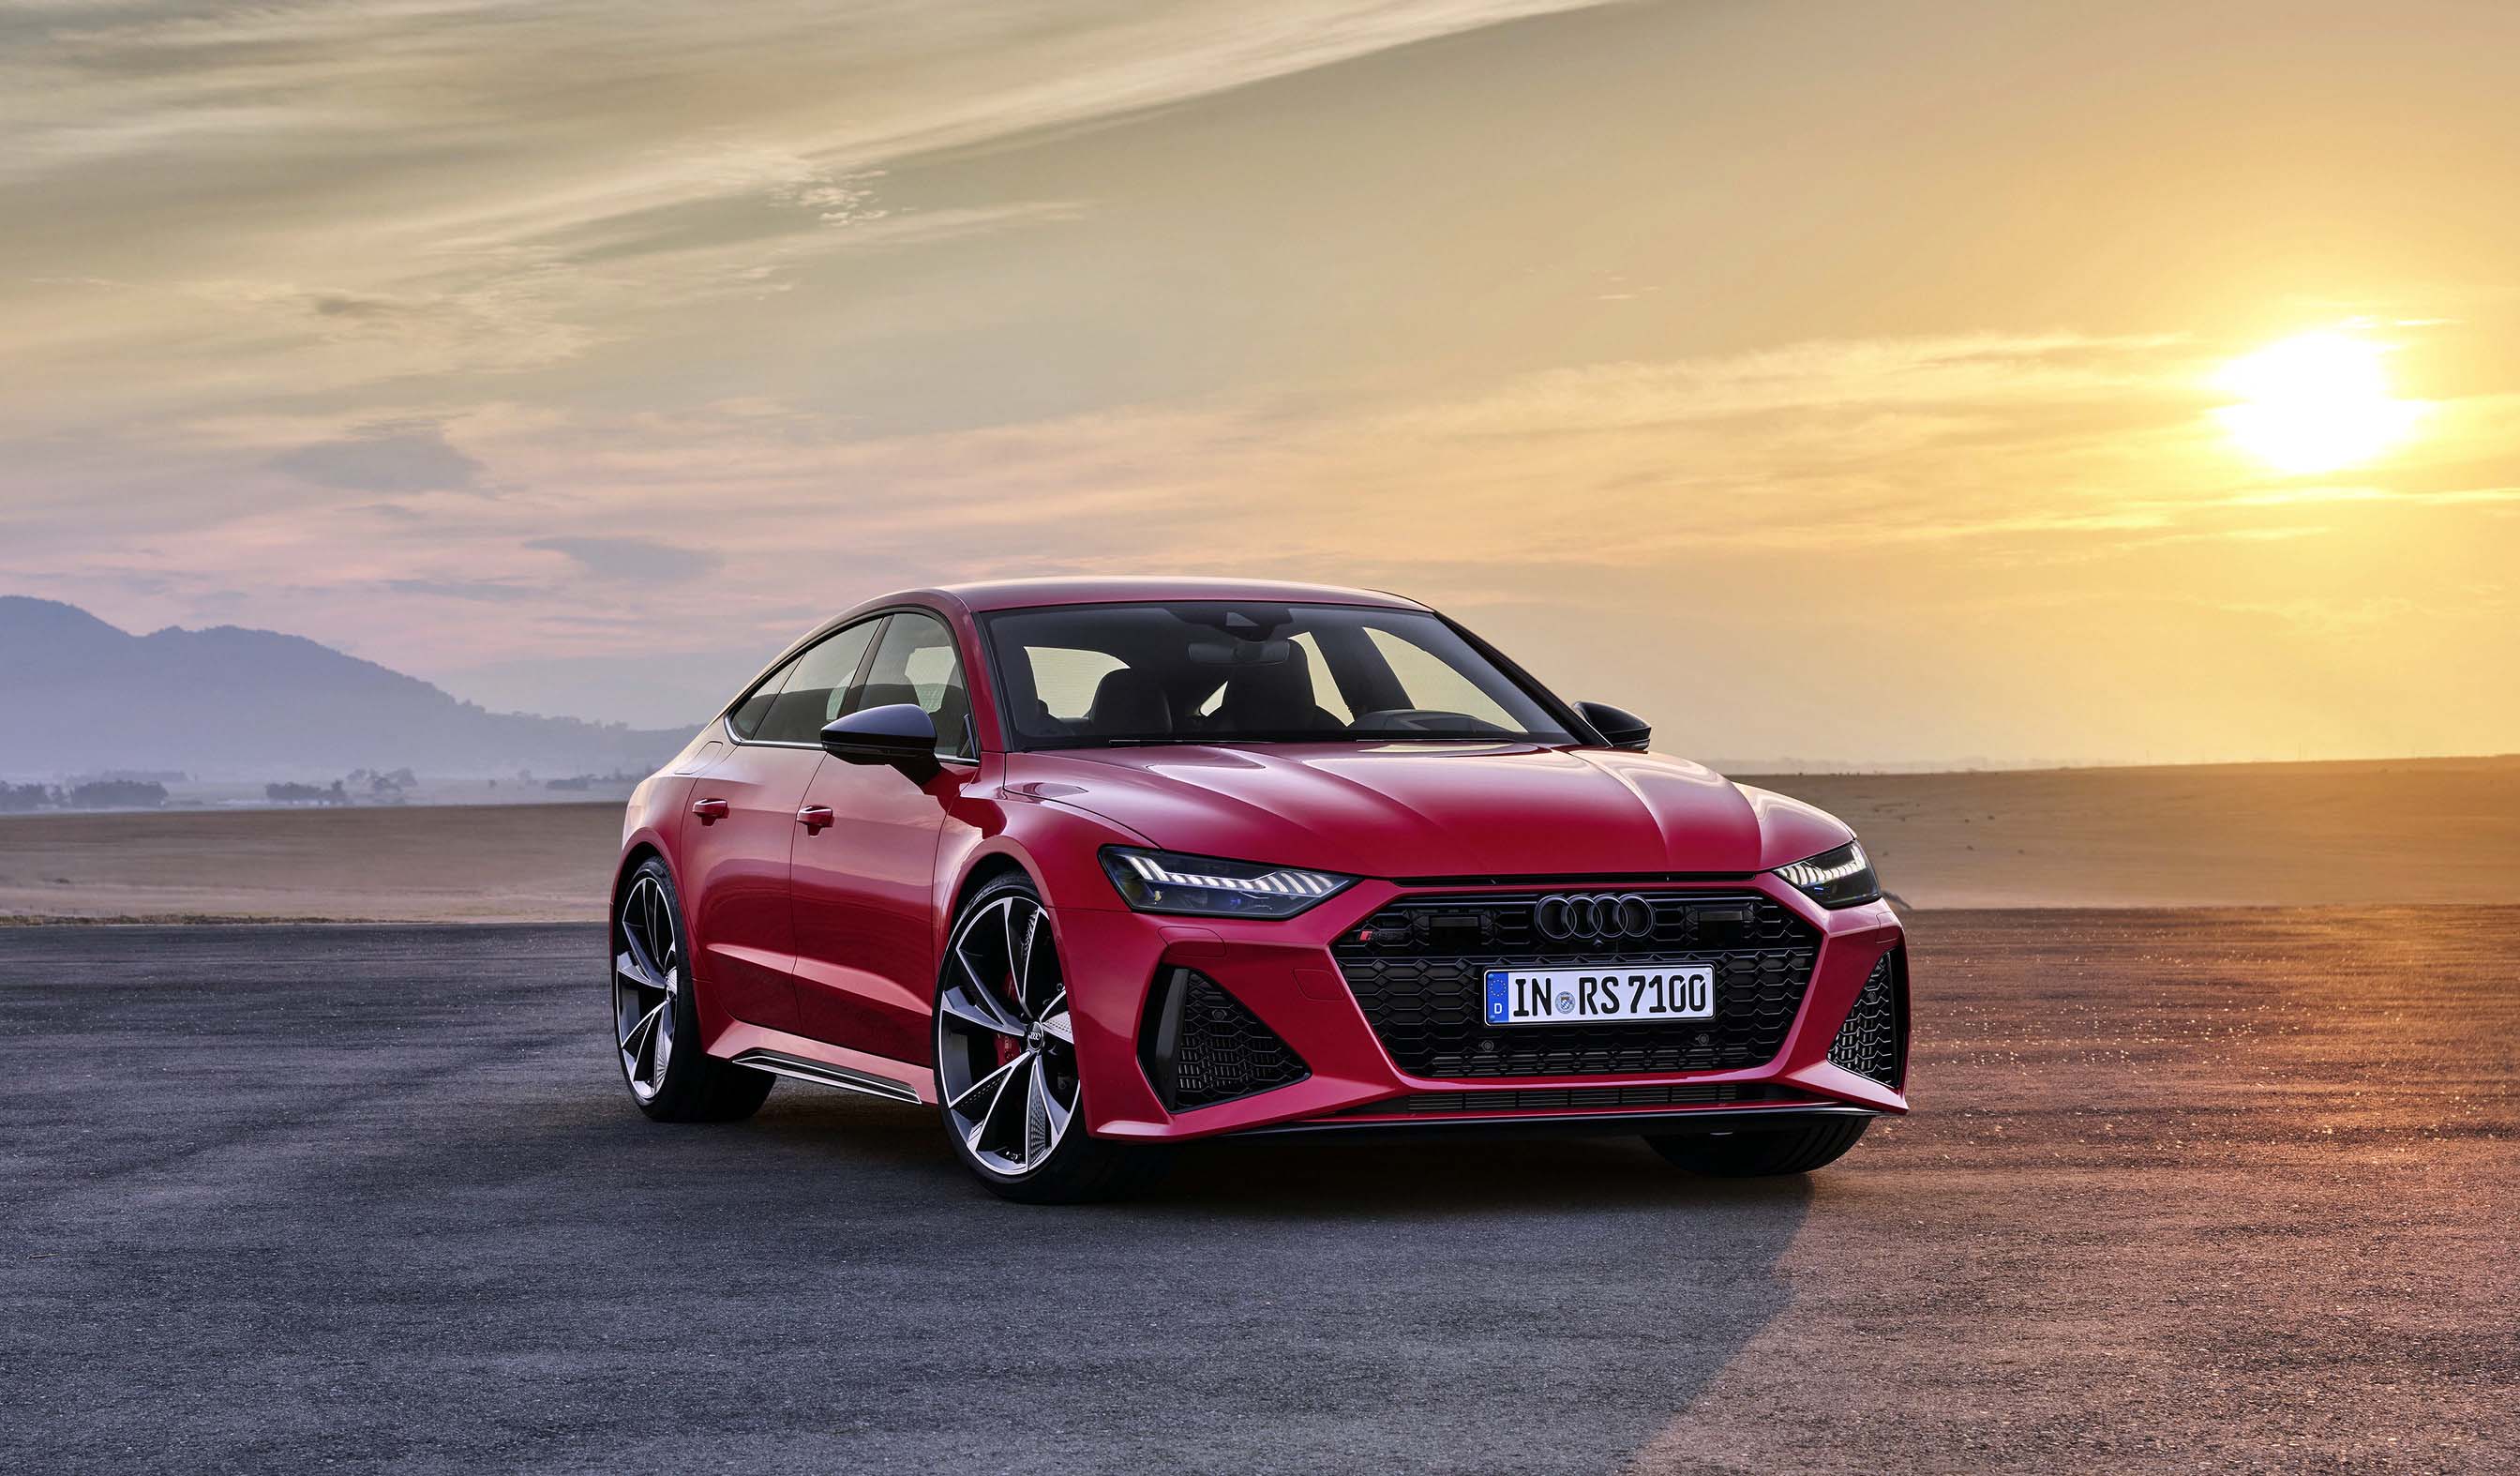 All-new Audi RS 7 Sportback drives in India